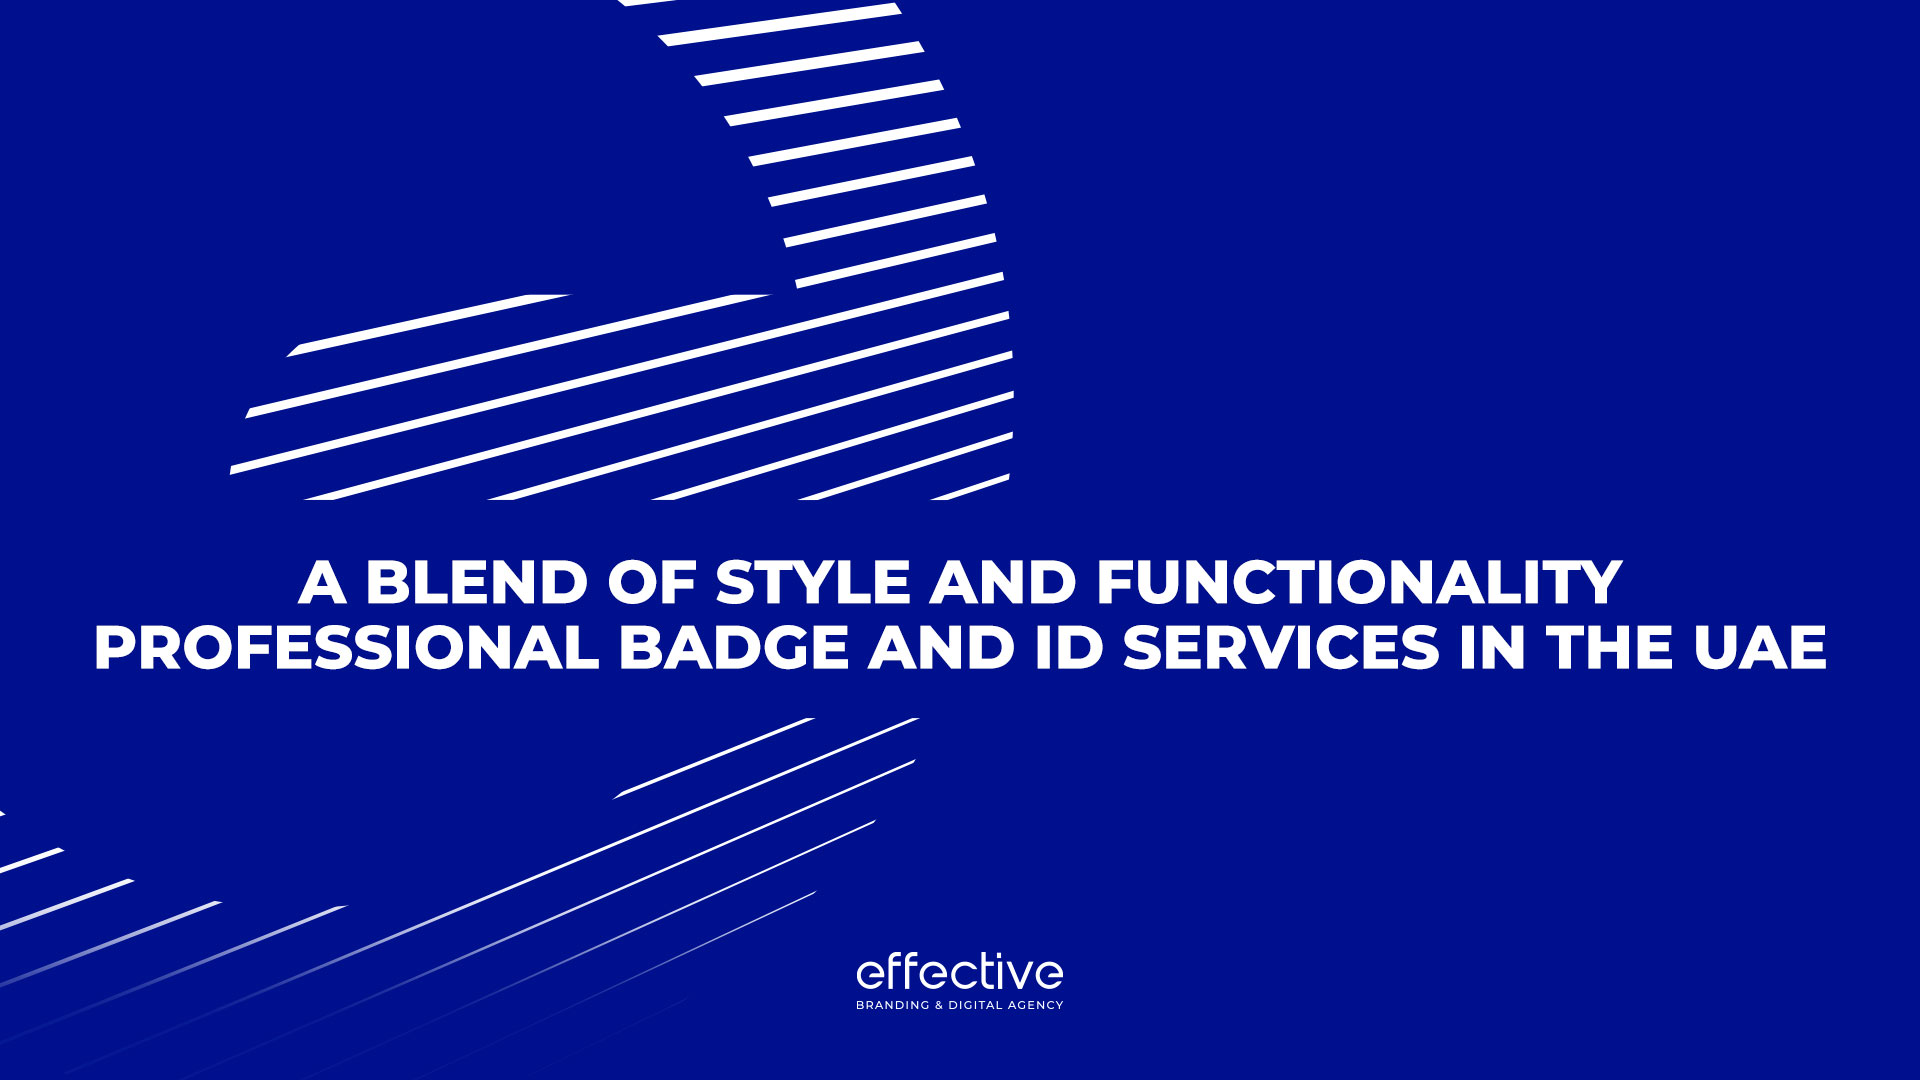 A Blend of Style and Functionality: Professional Badge and ID Services in the UAE